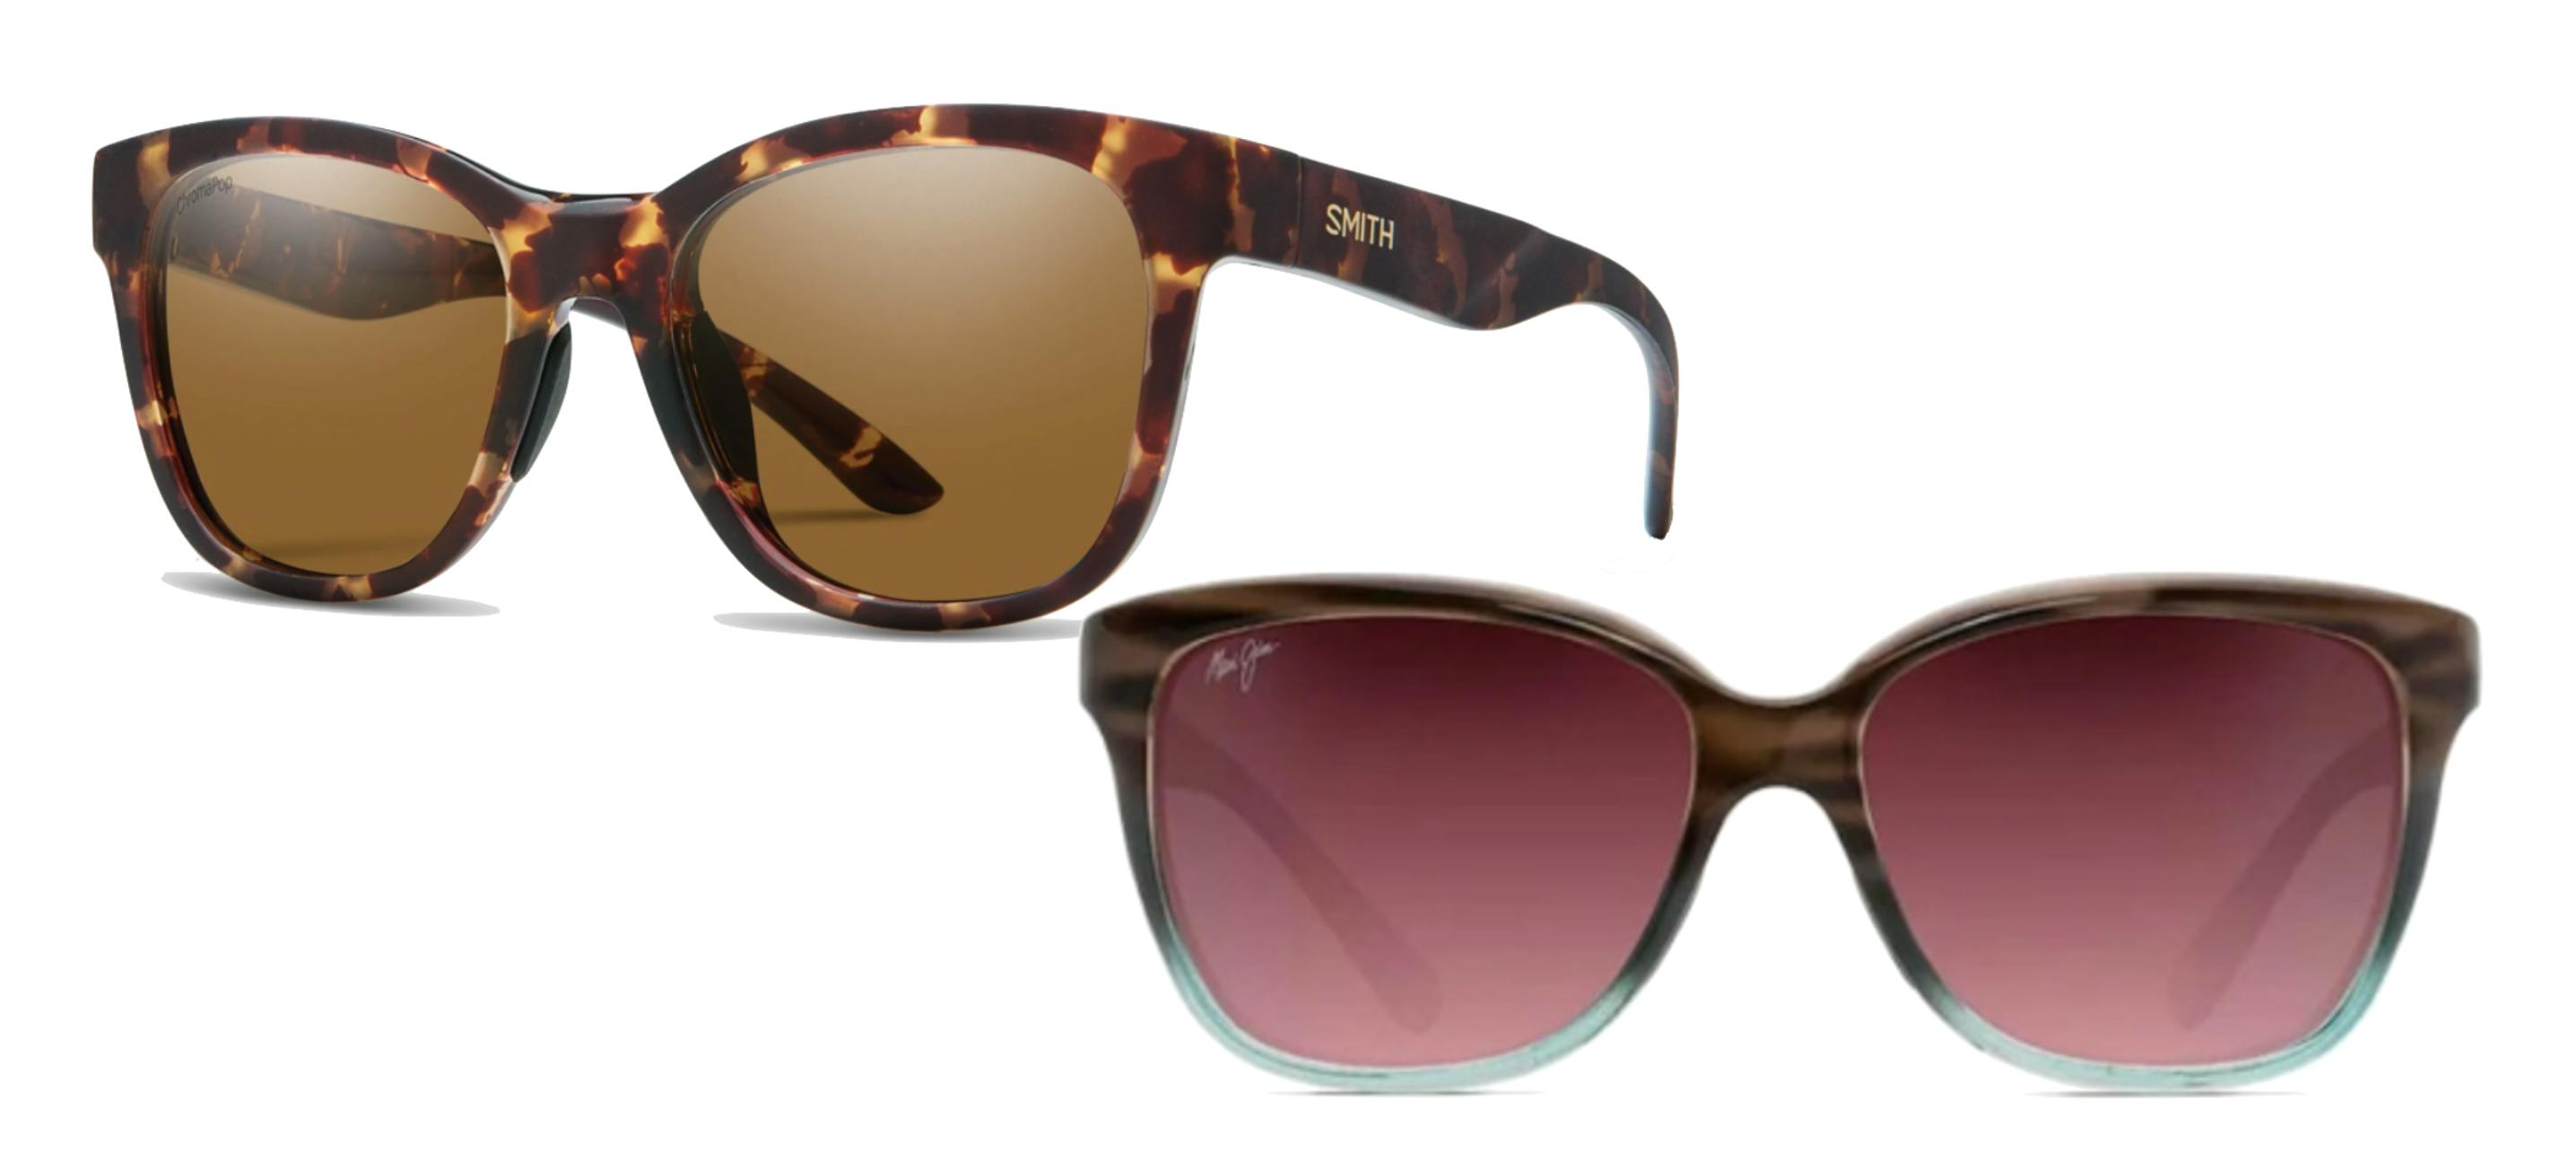 Product images of the Smith Suncloud Caper Chromapop Polarized Sunglasses and the Maui Jim Starfish Sunglasses.